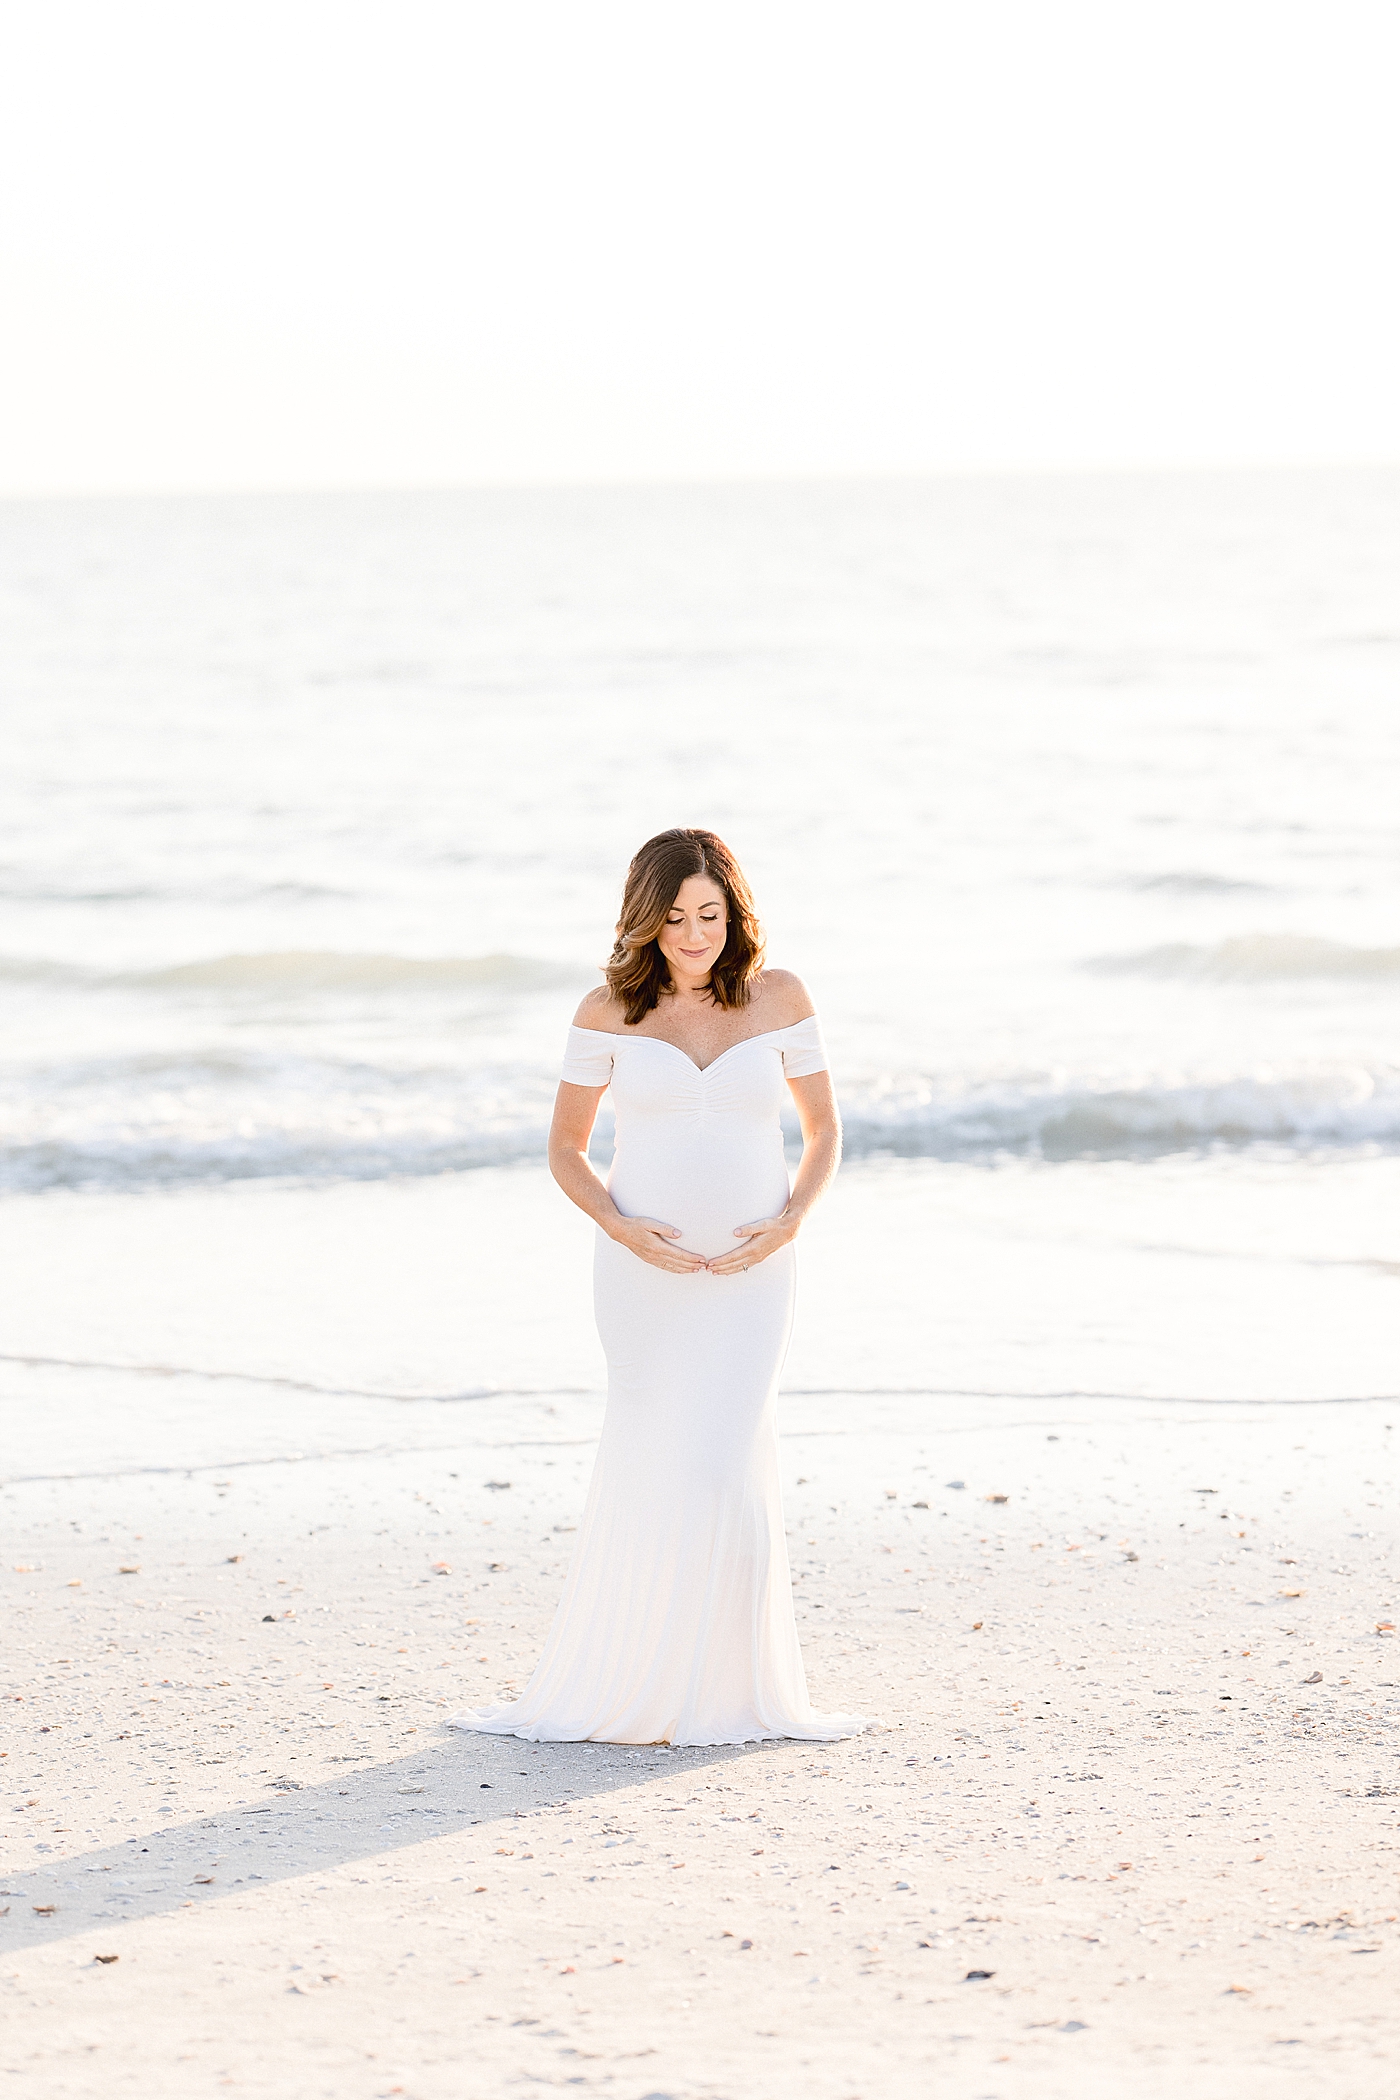 Golden hour maternity session in St. Pete Beach. Photo by Brittany Elise Photography.